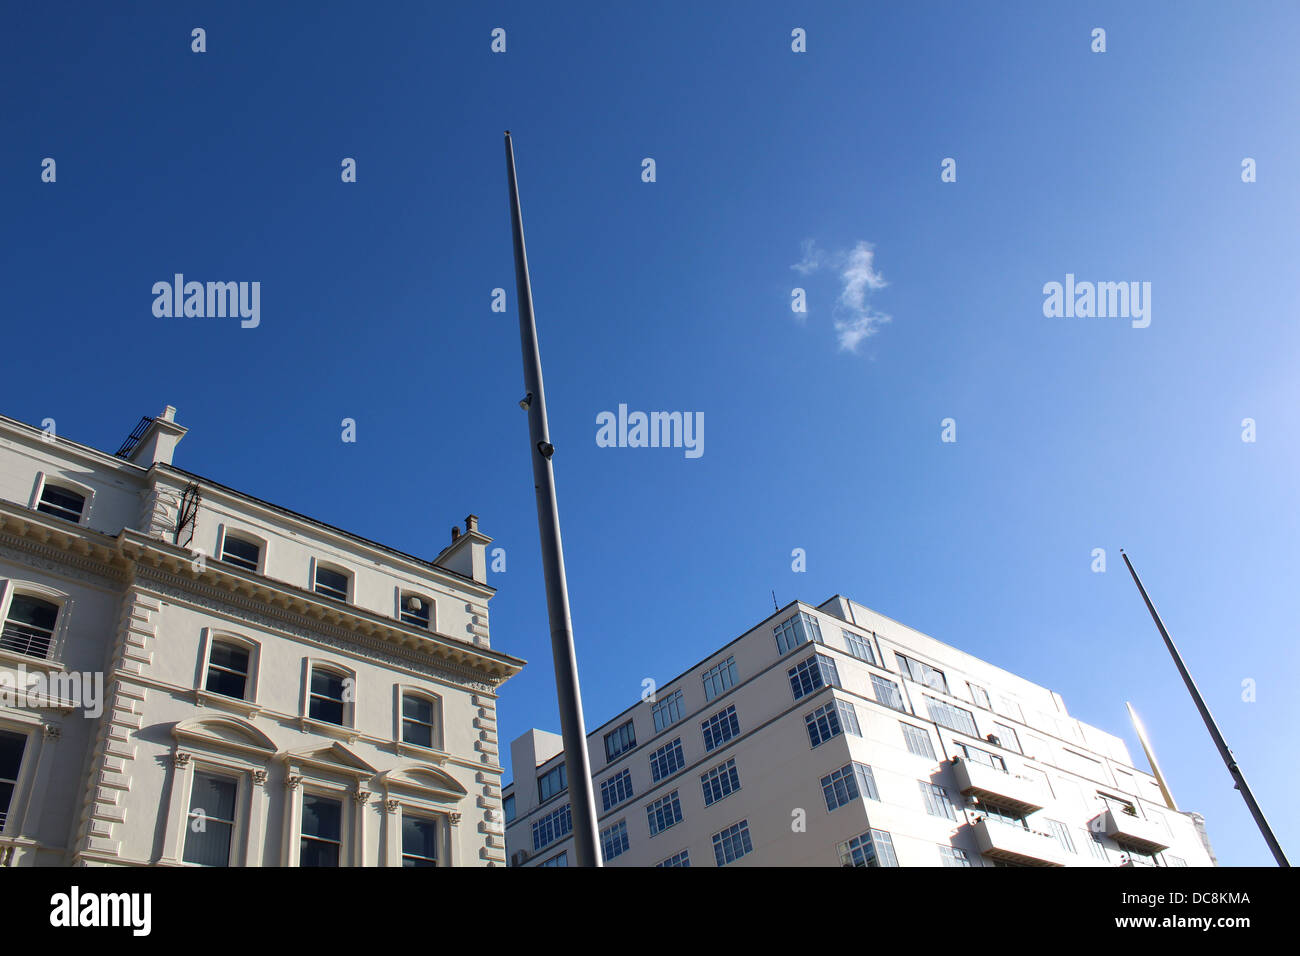 Two white buildings along Kensington gore with a single cloud in the sky Stock Photo